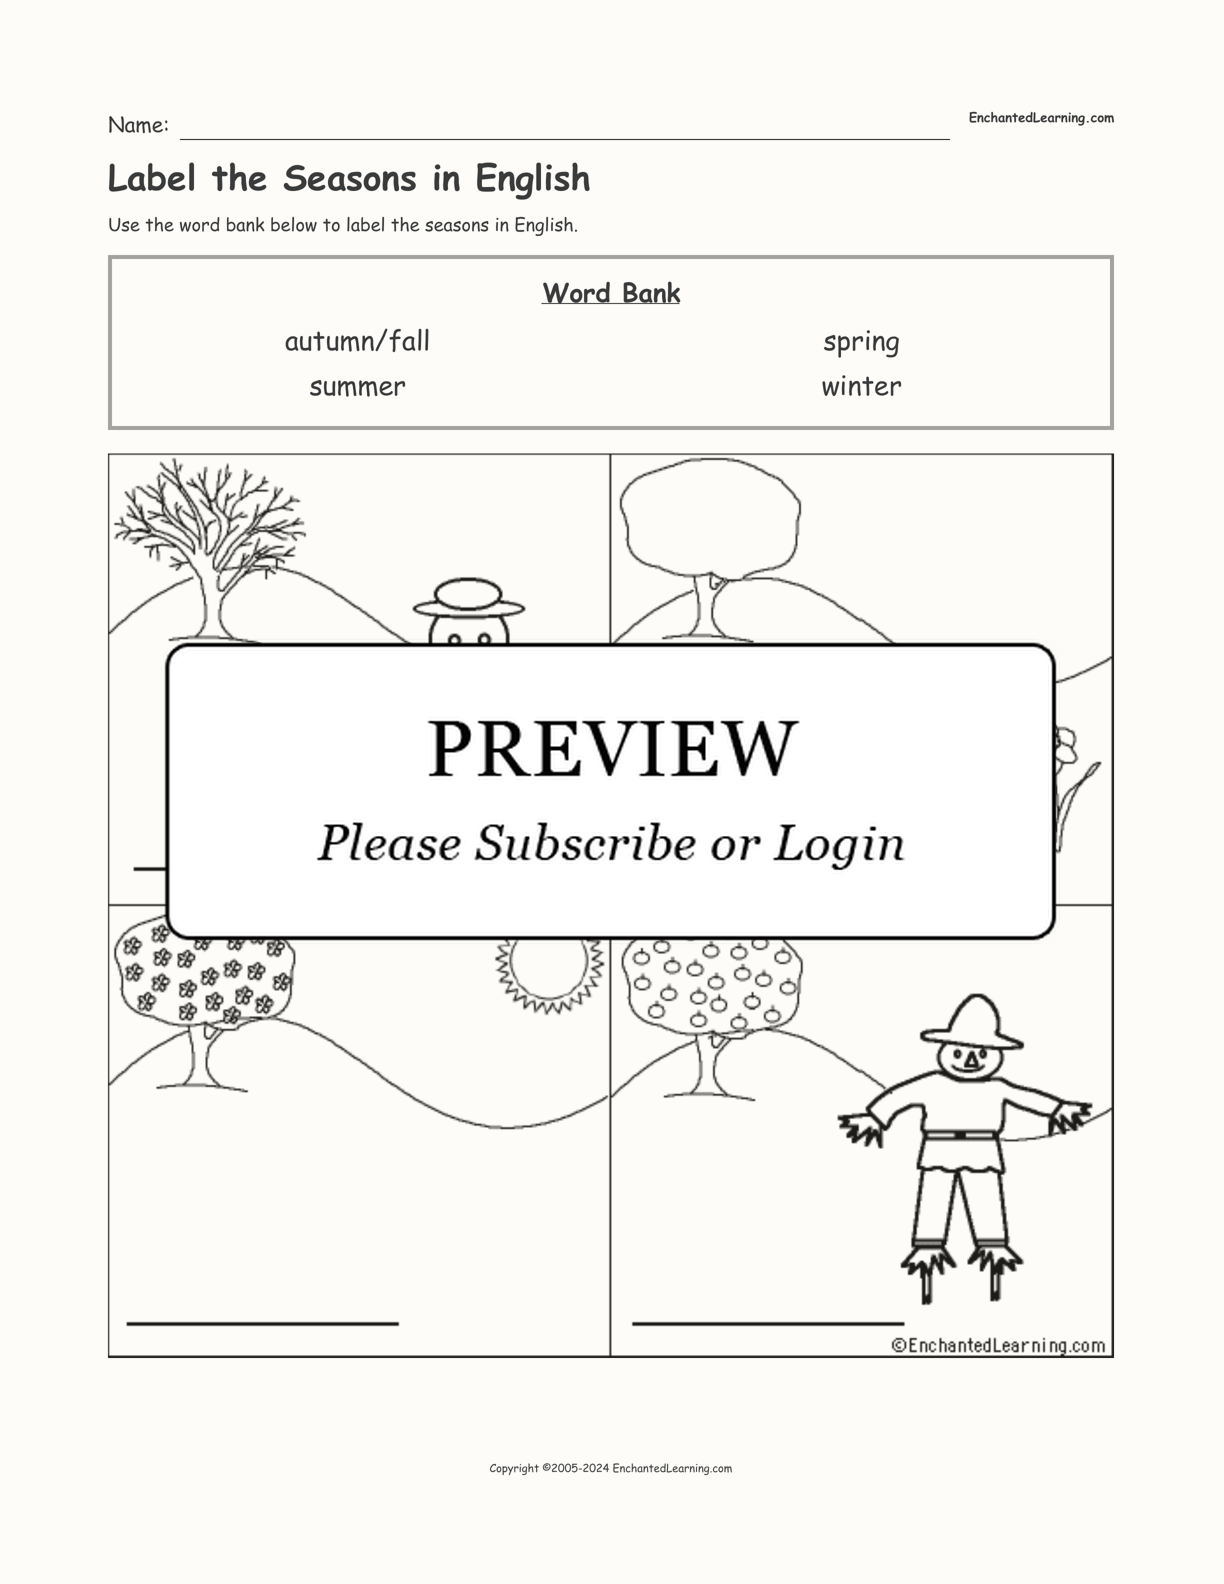 Label the Seasons in English interactive worksheet page 1